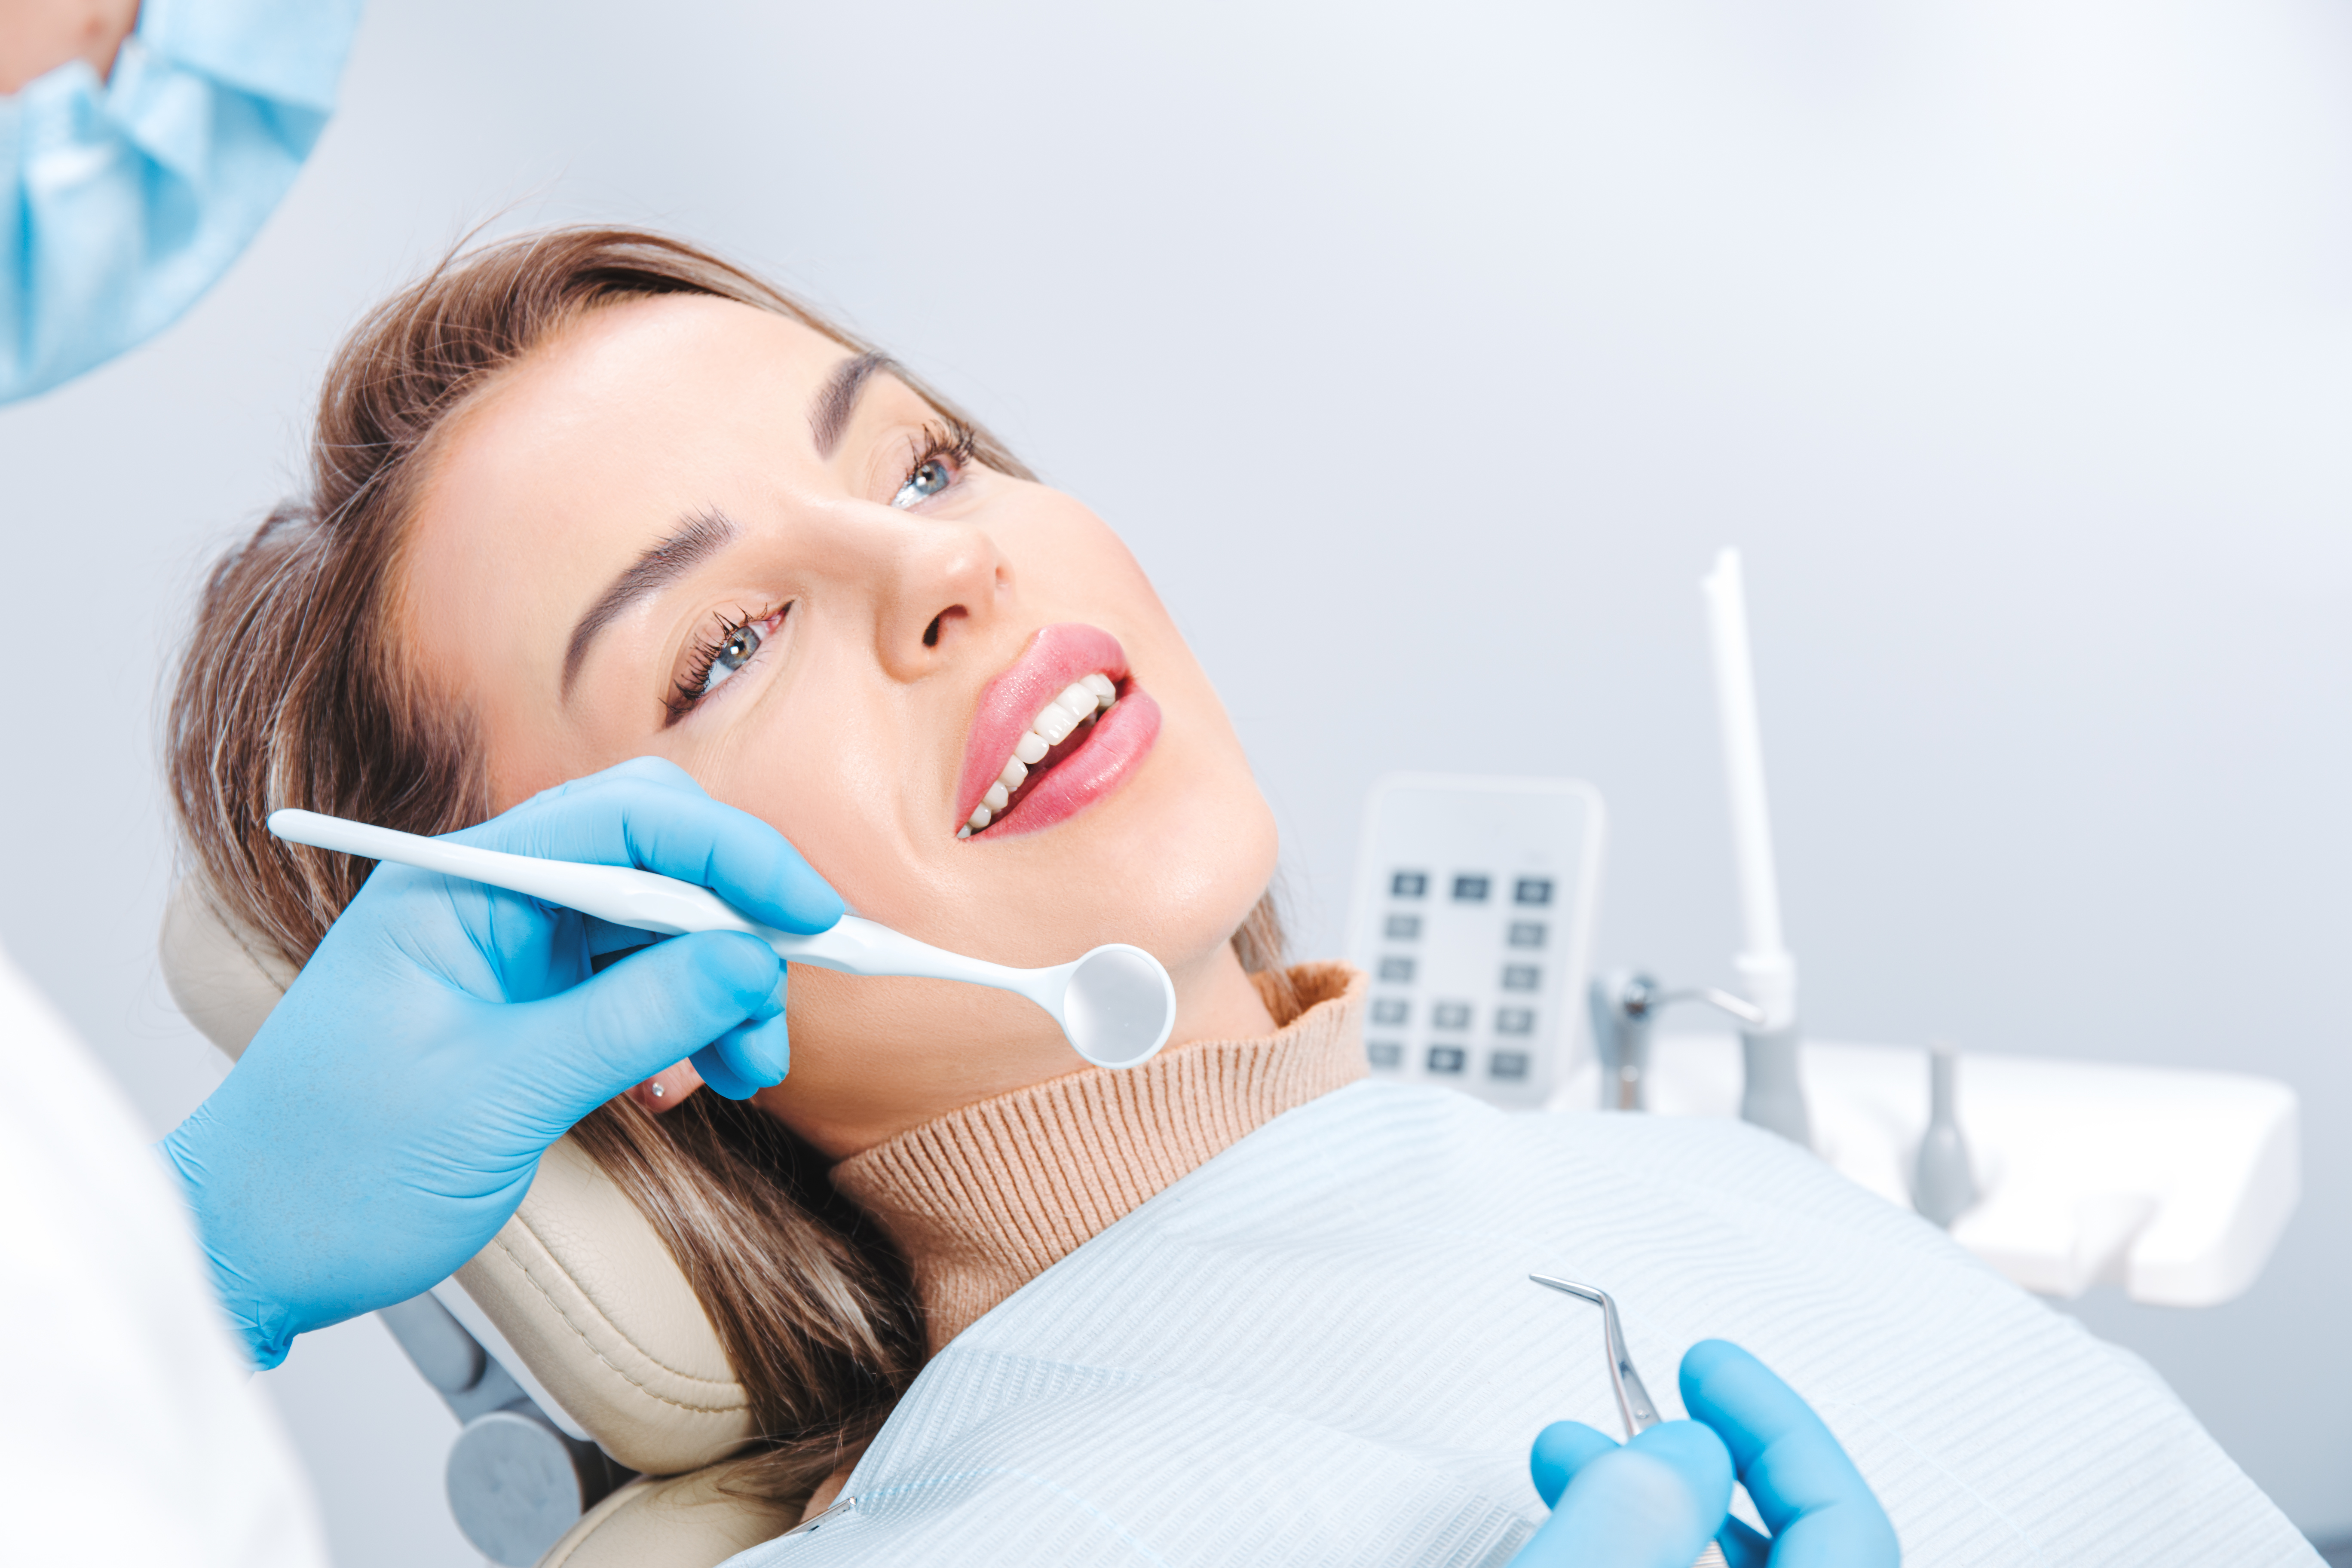 attractive-smiling-woman-at-the-dentist-appointmen-2022-11-29-20-24-13-utc